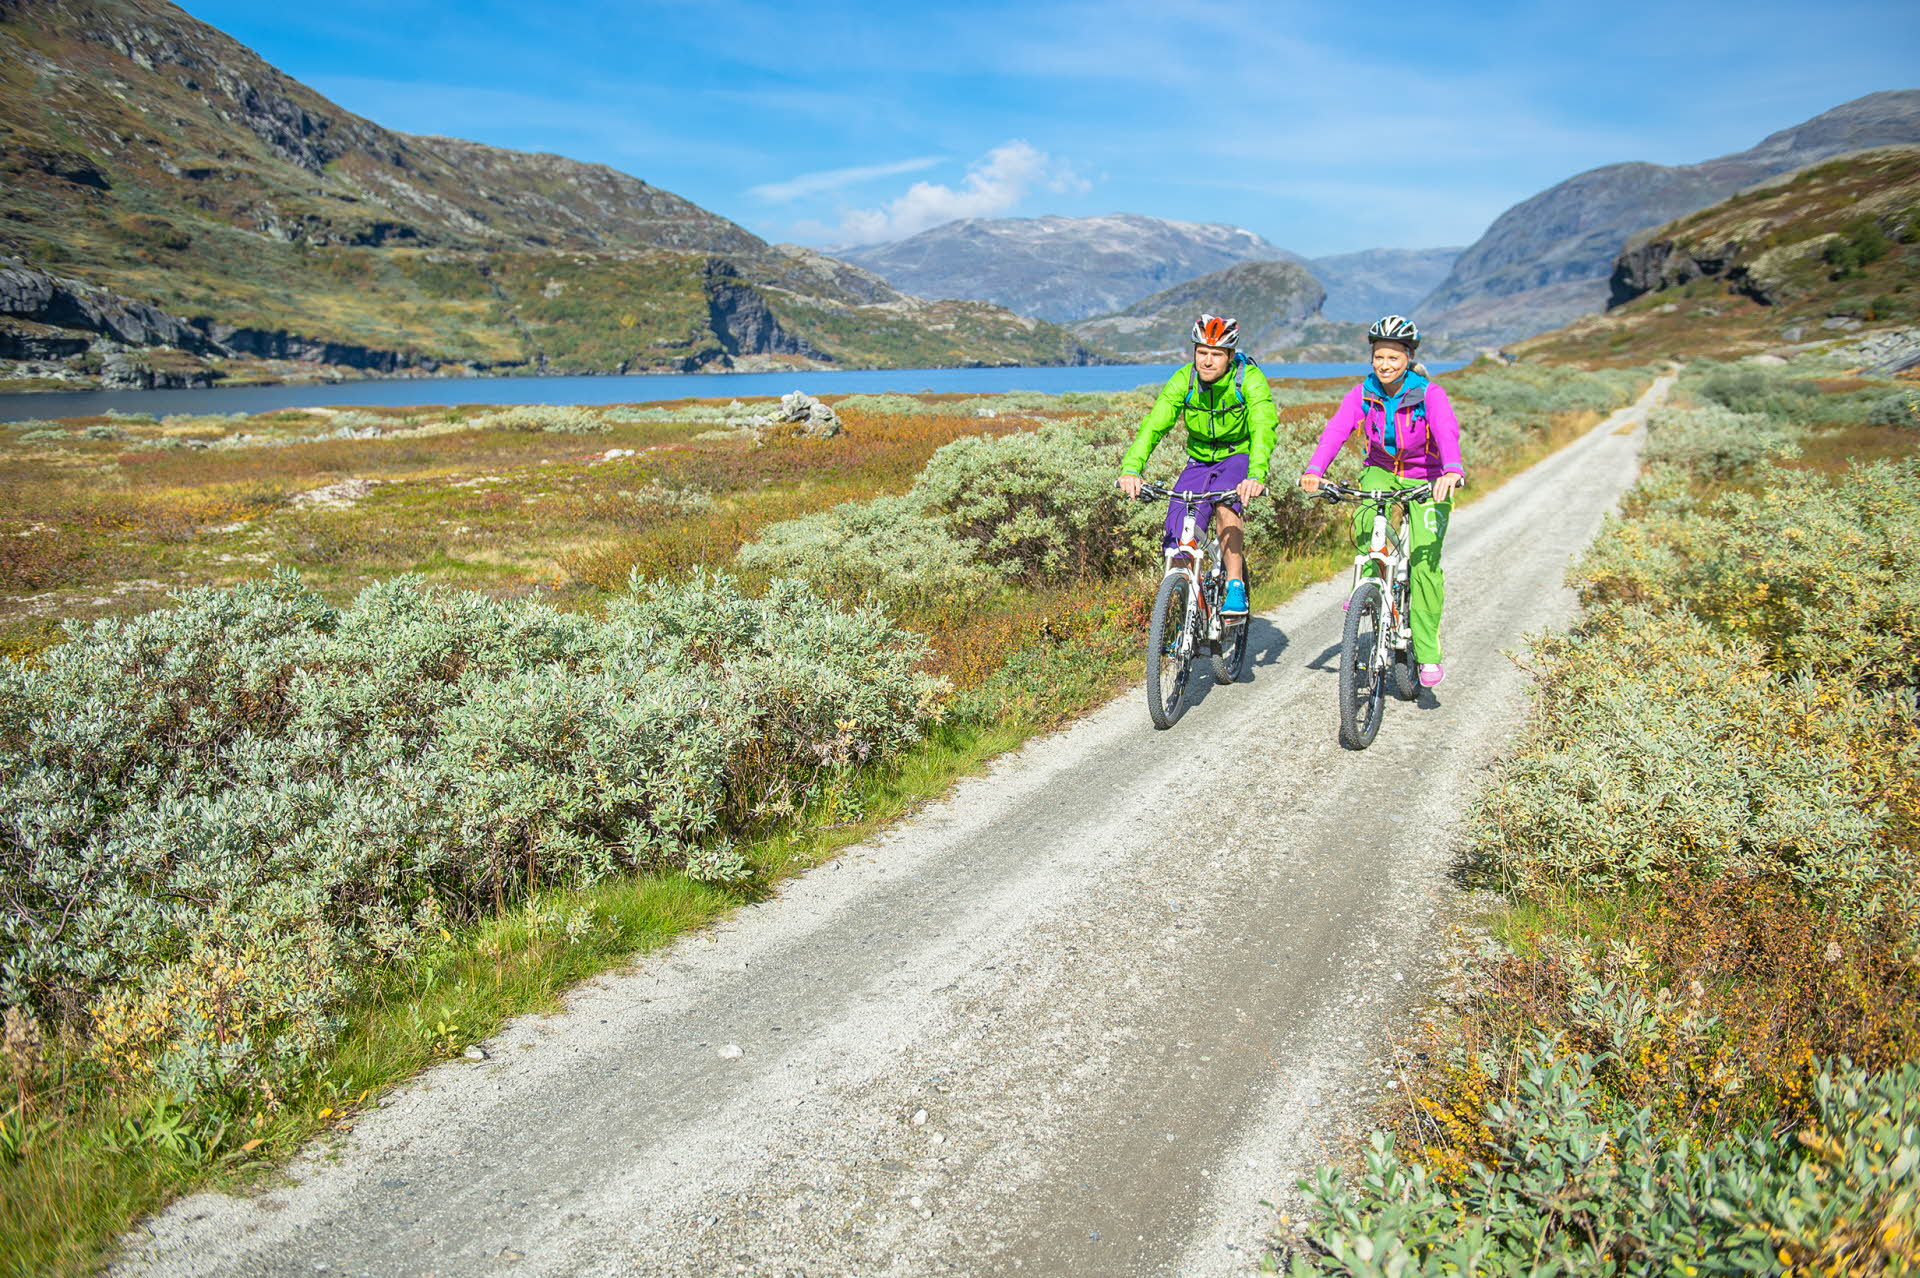 A man and a woman cycling on a montainuos gravel road in sunny weather.